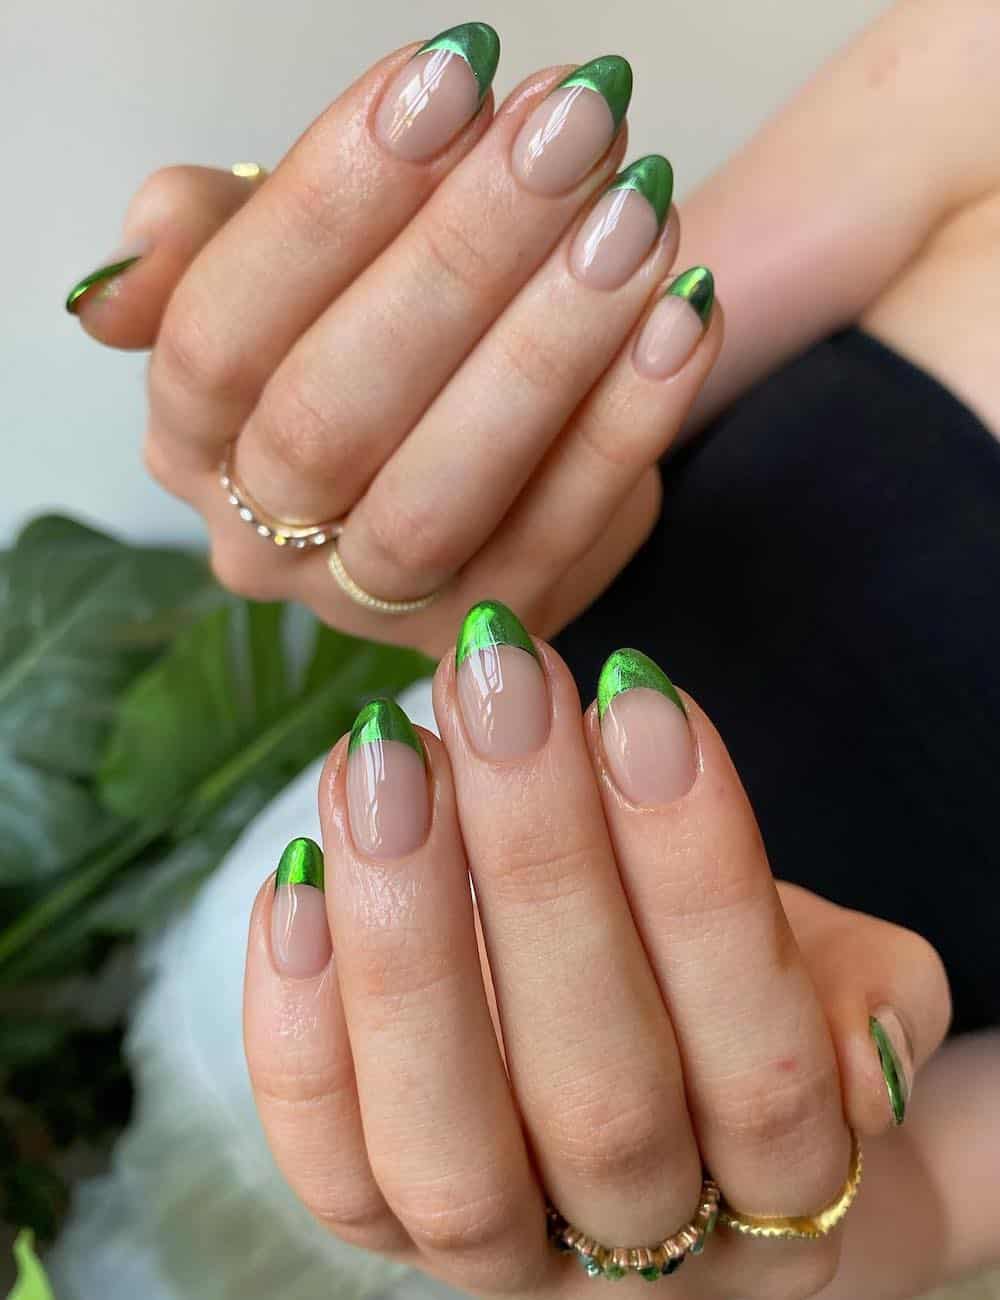 short round nude nails with bright chrome green tips